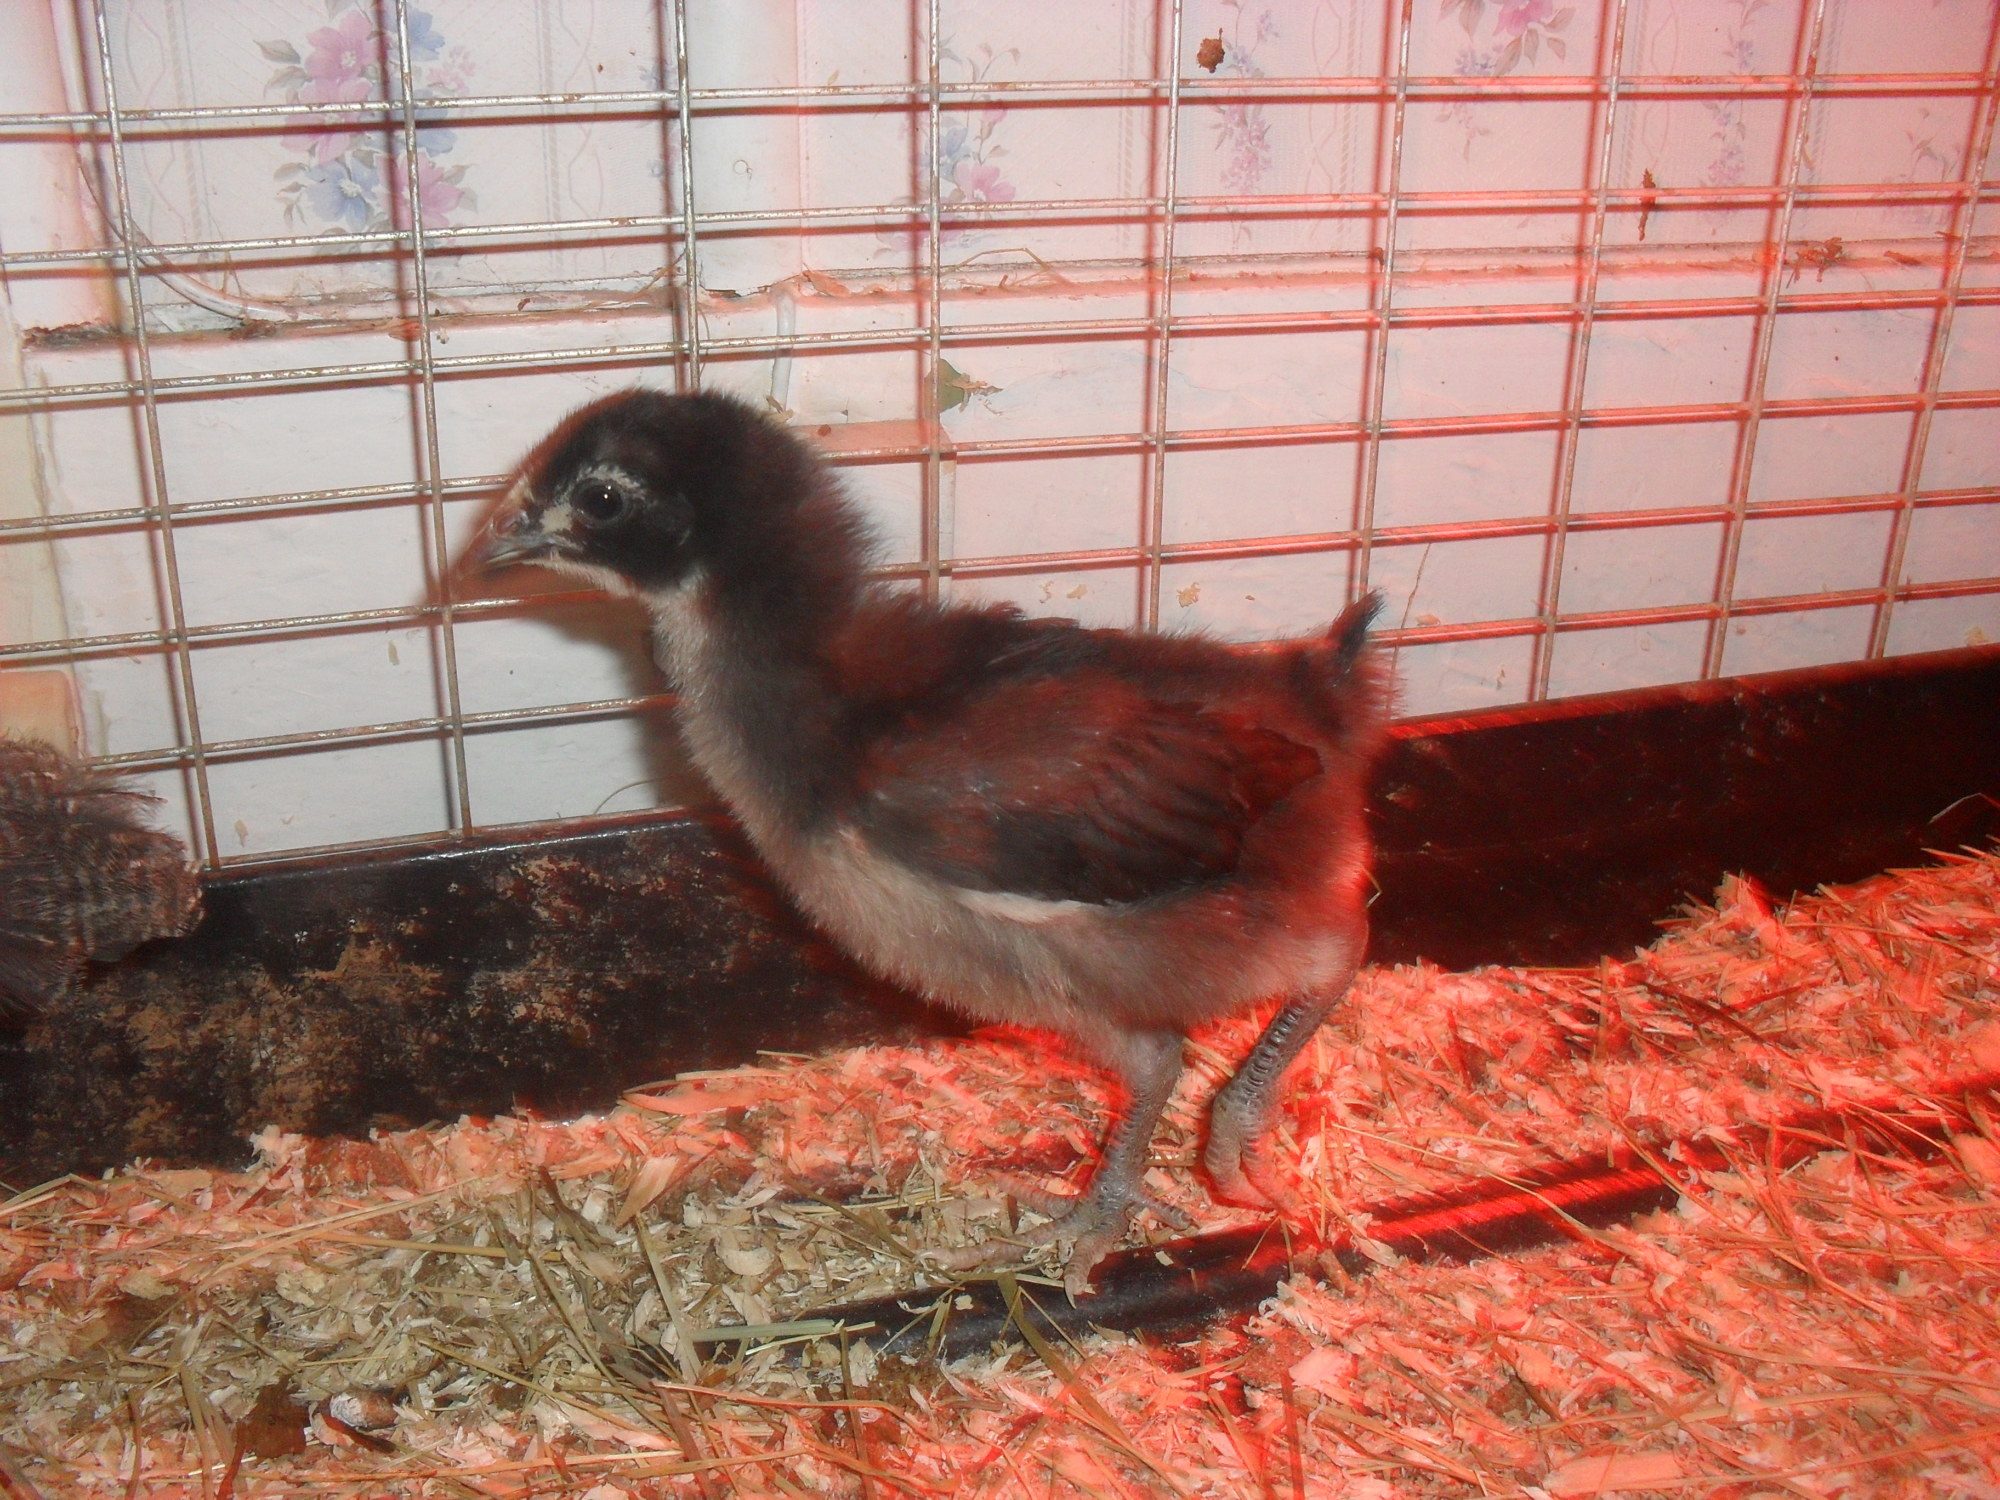 jersey giant pullets